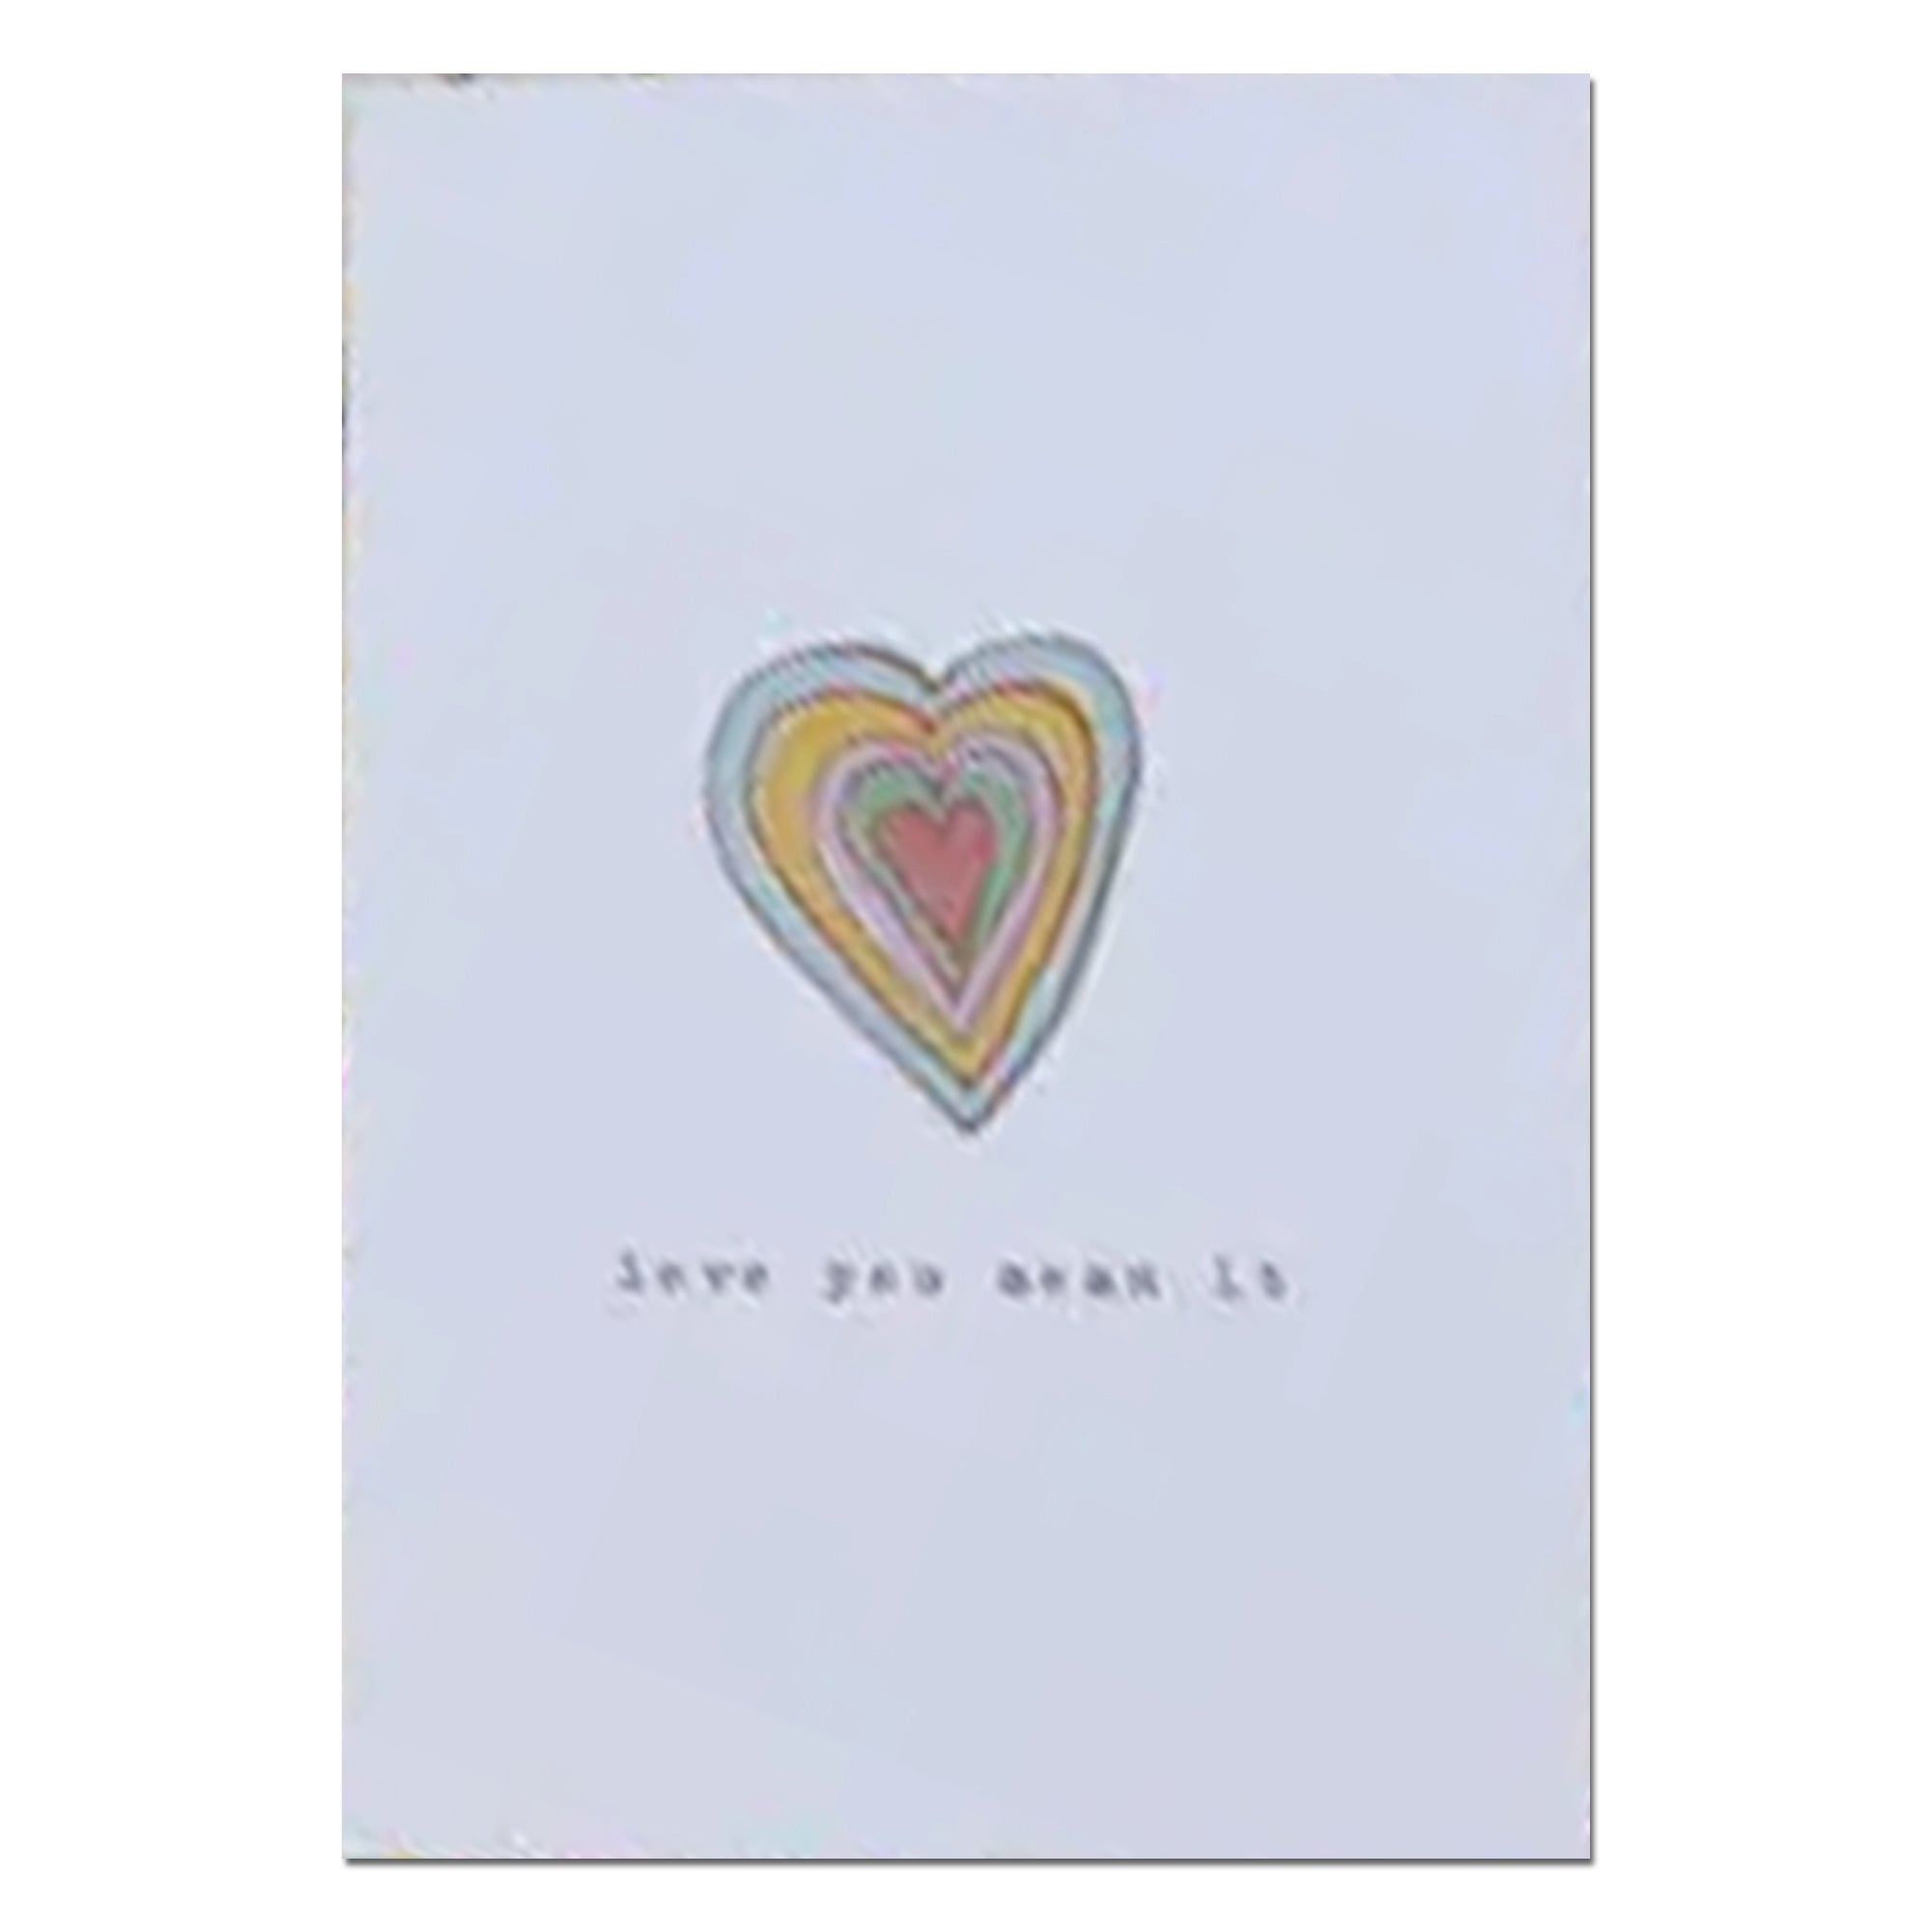 Party Tricks Chix Love You Mean It Greeting Card